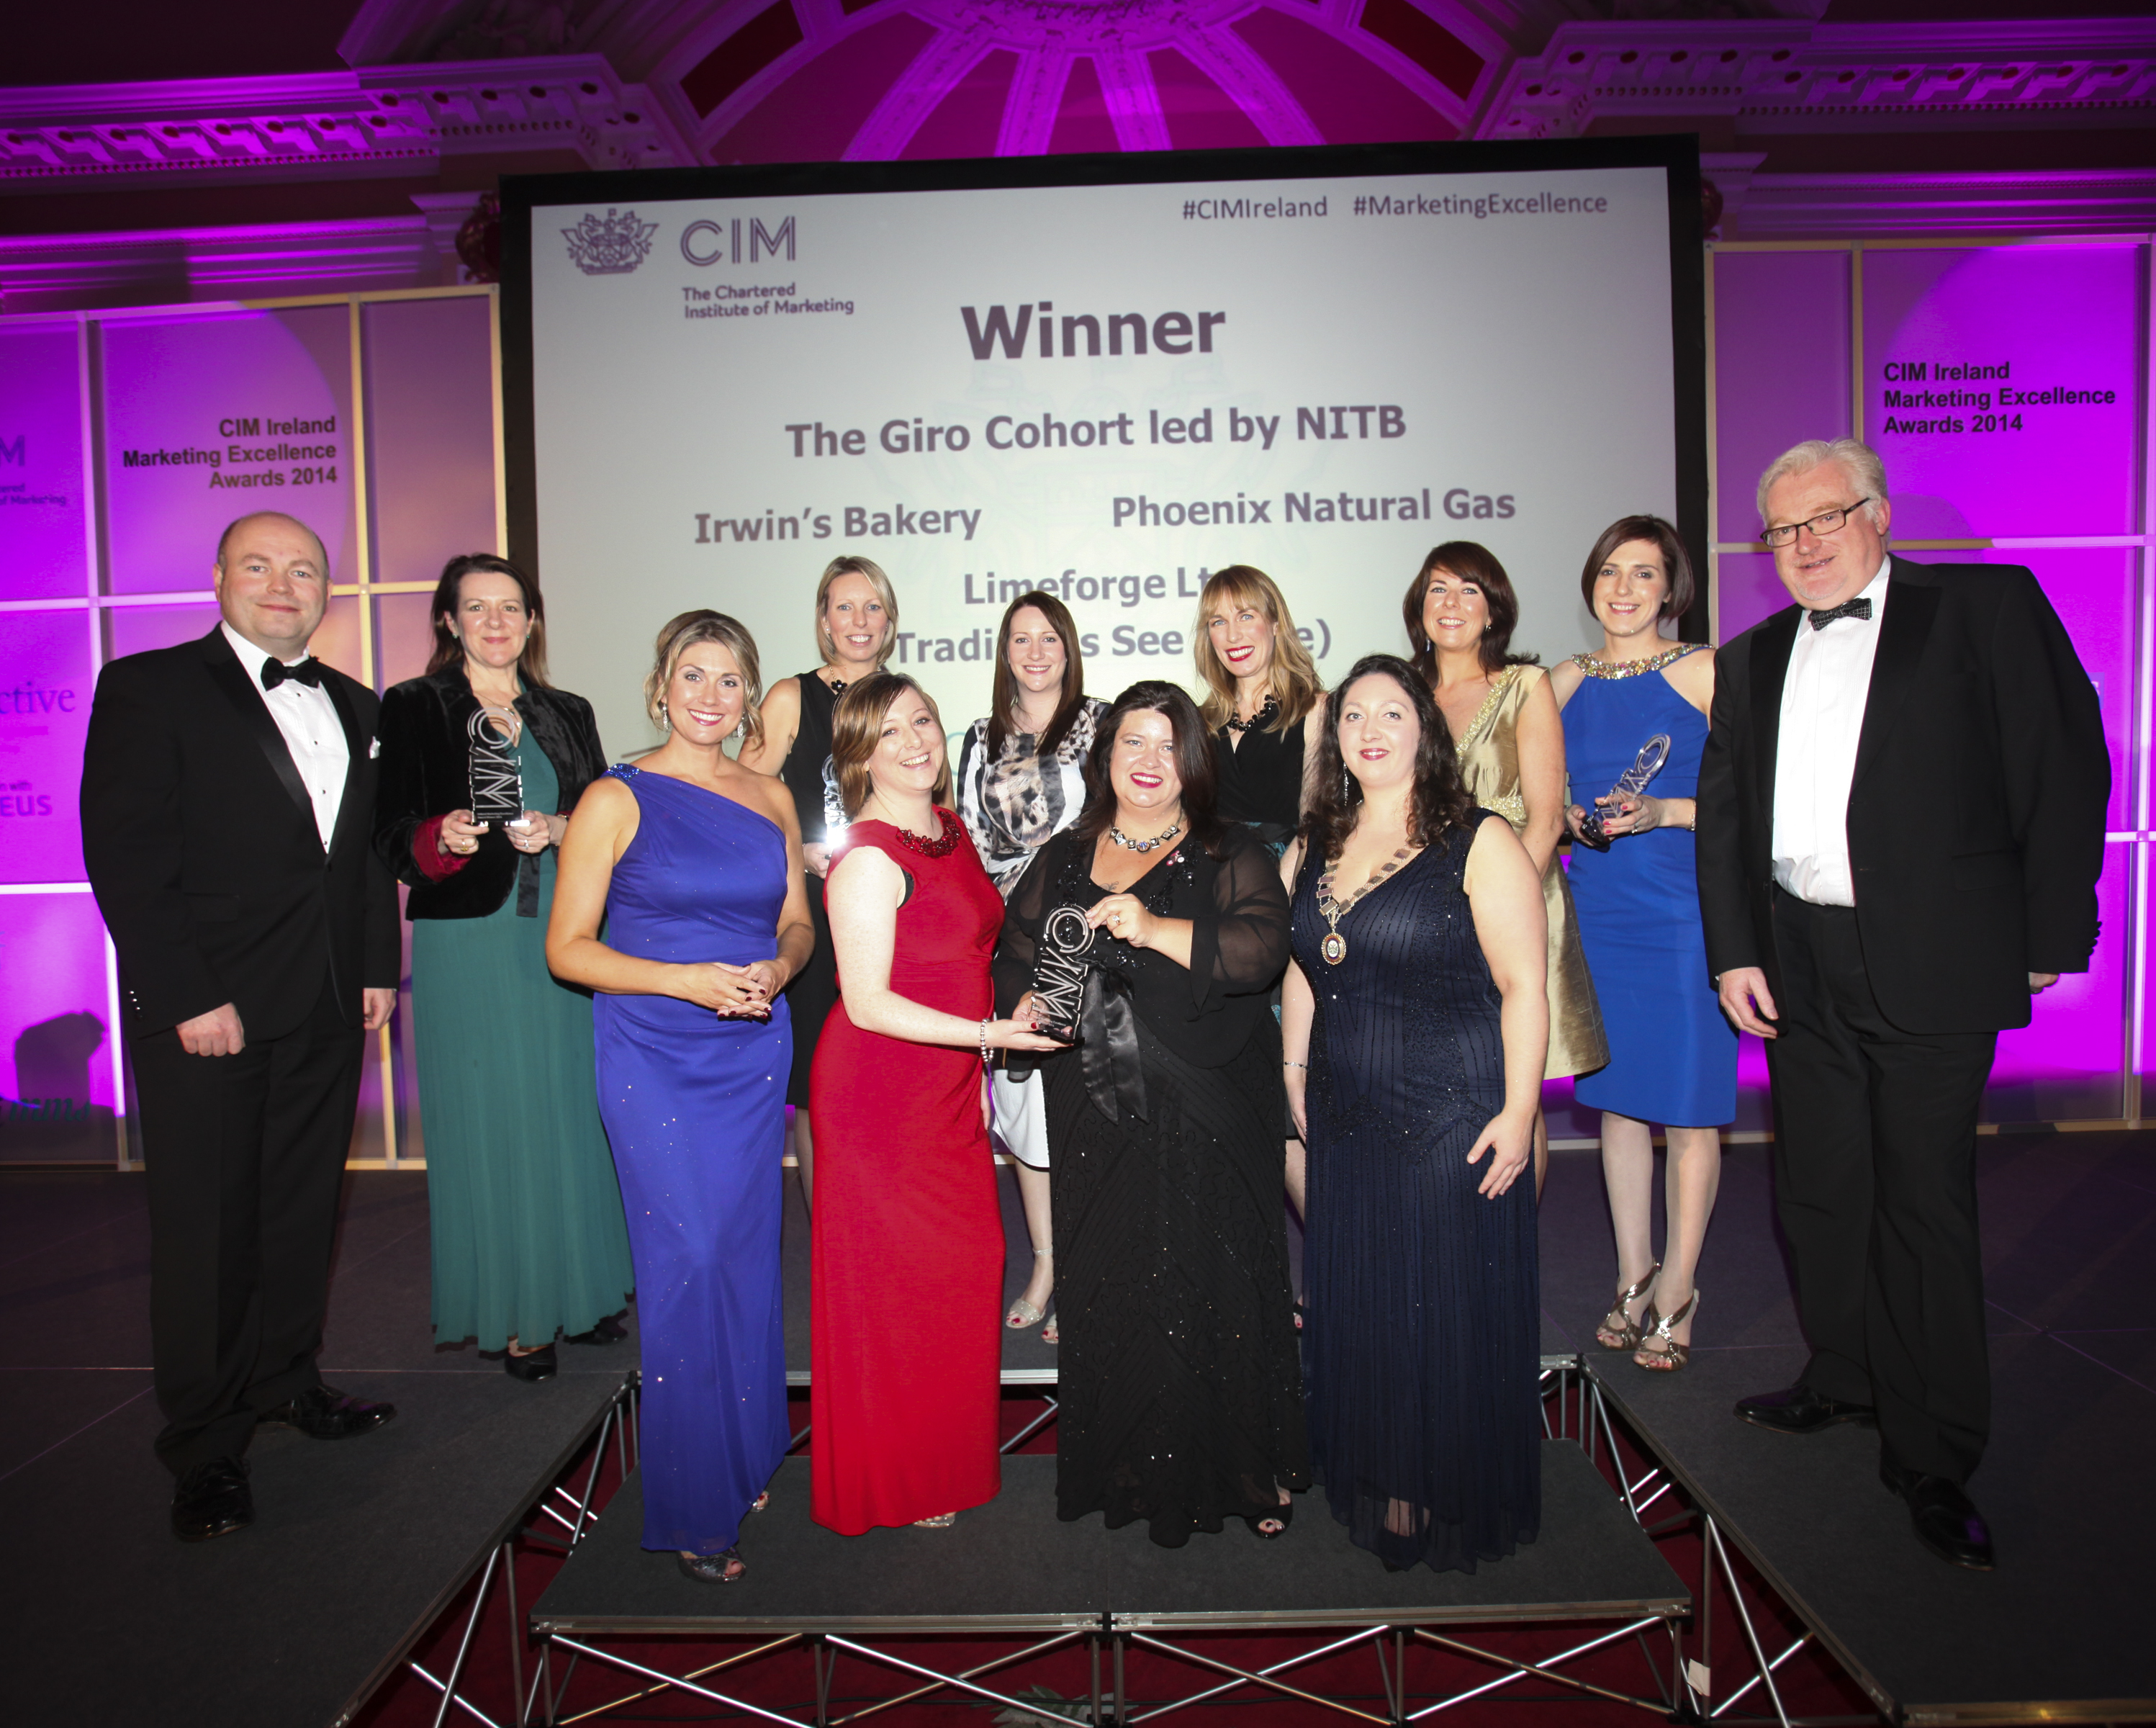 Marketing Awards show off the best of brand Northern Ireland